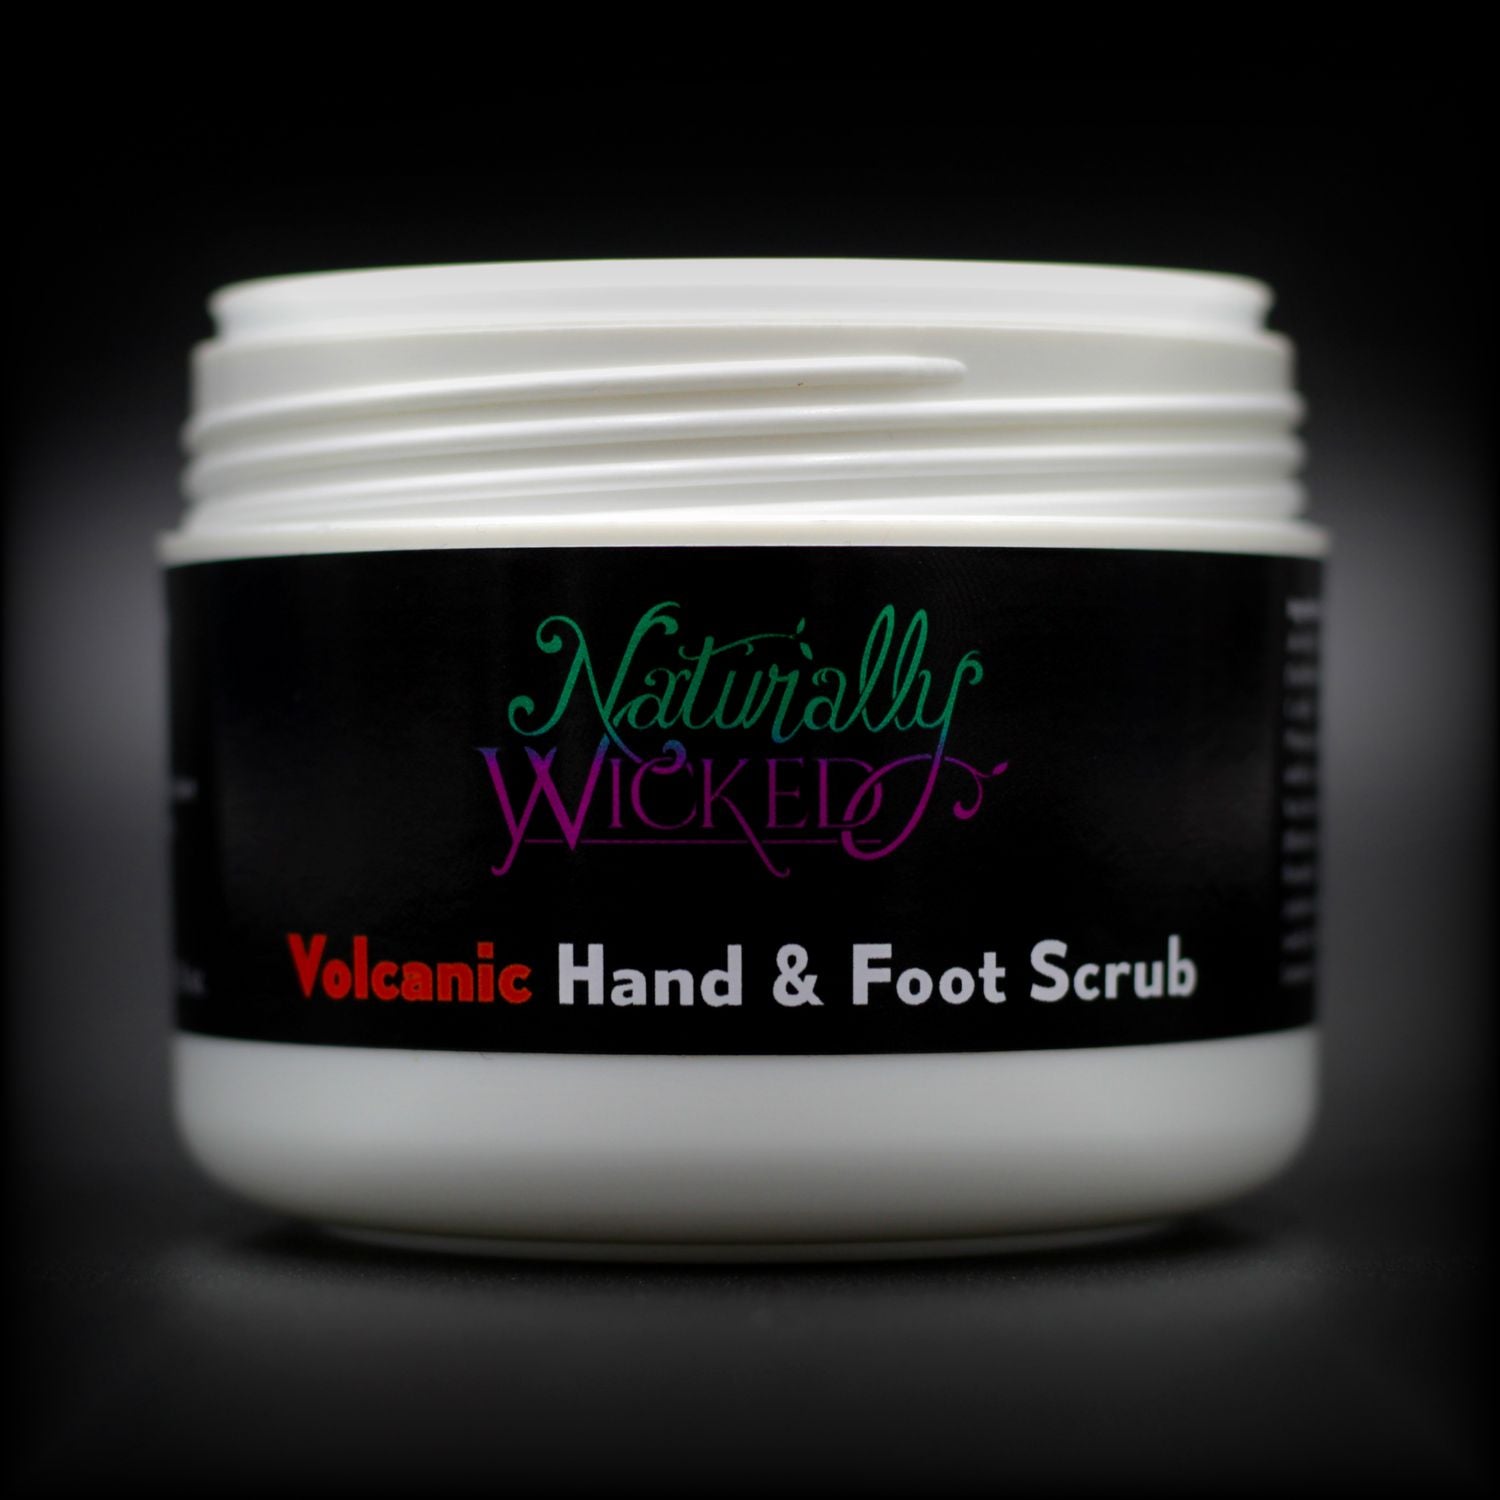 Naturally Wicked Volcanic Hand & Foot Scrub Container, Seal & Screw Connection Without Lid